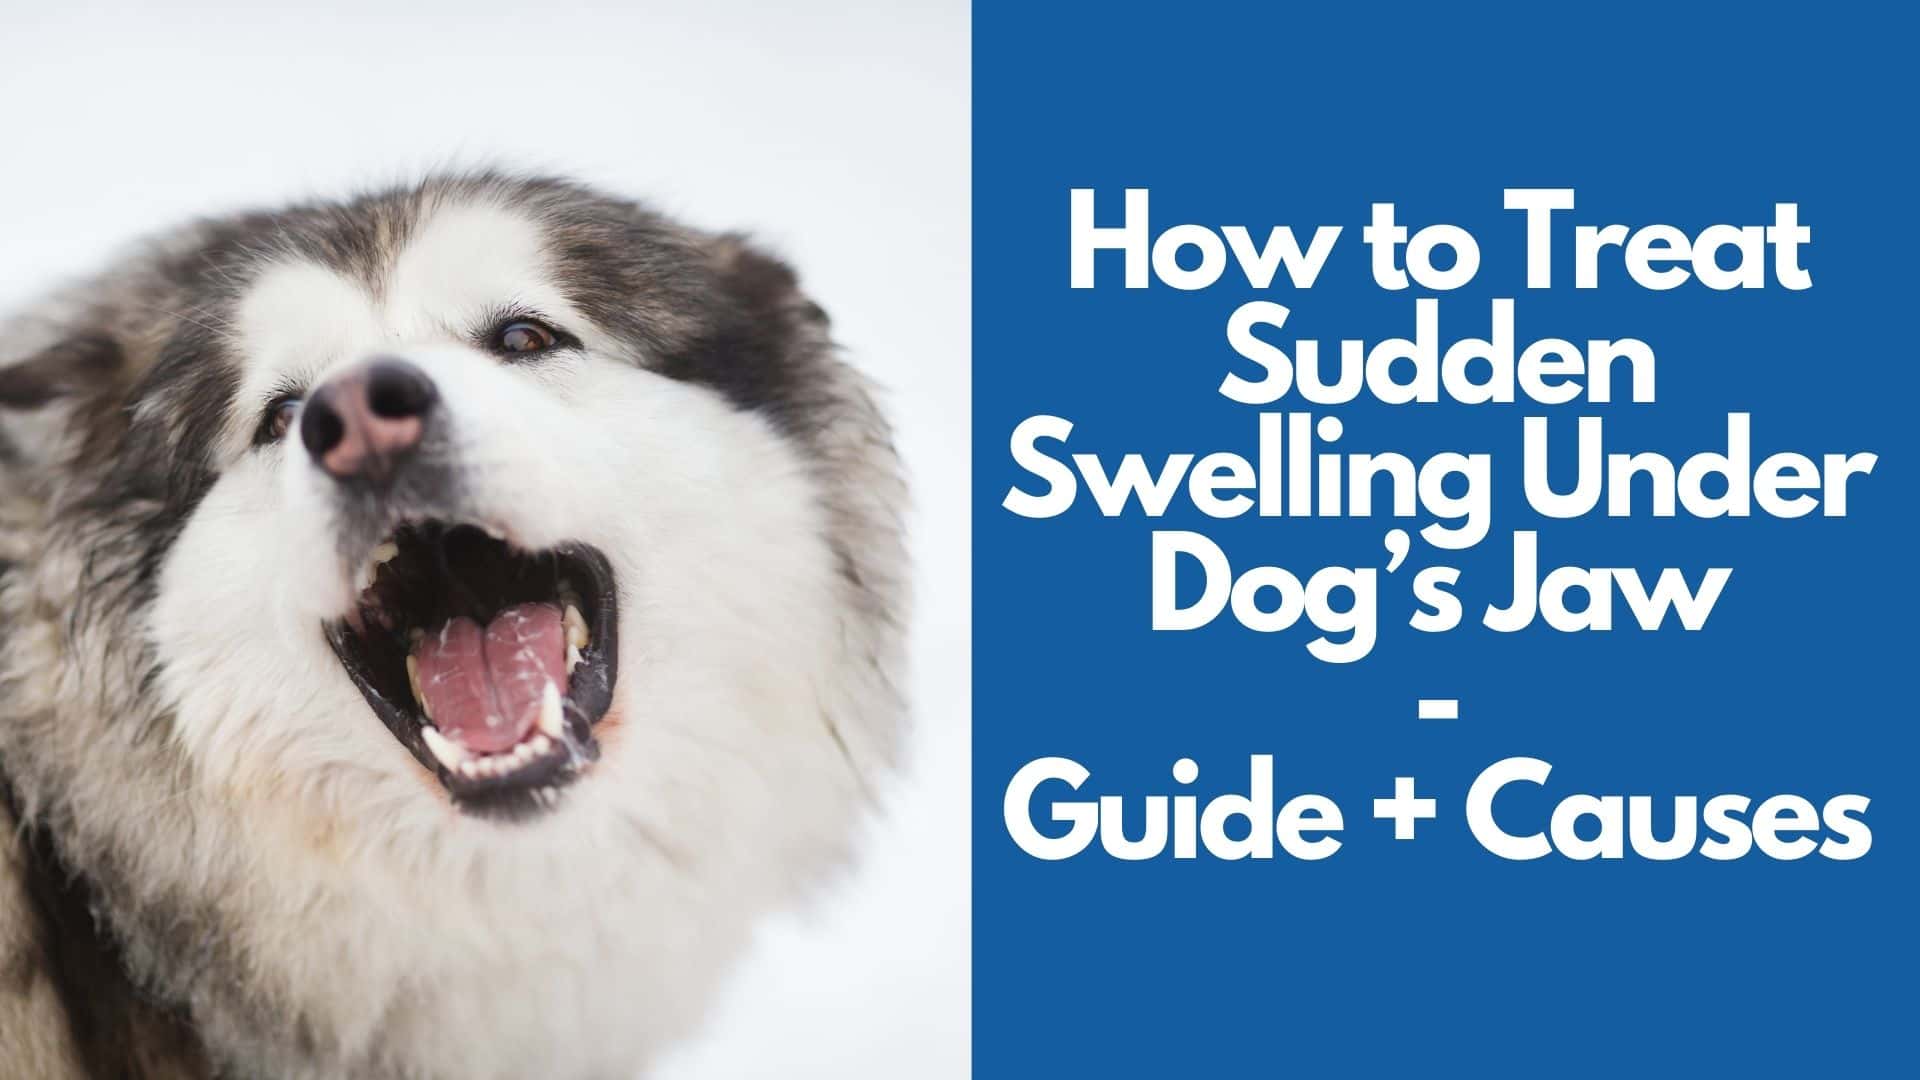 How to Treat Sudden Swelling Under Dog’s Jaw Guide + Causes